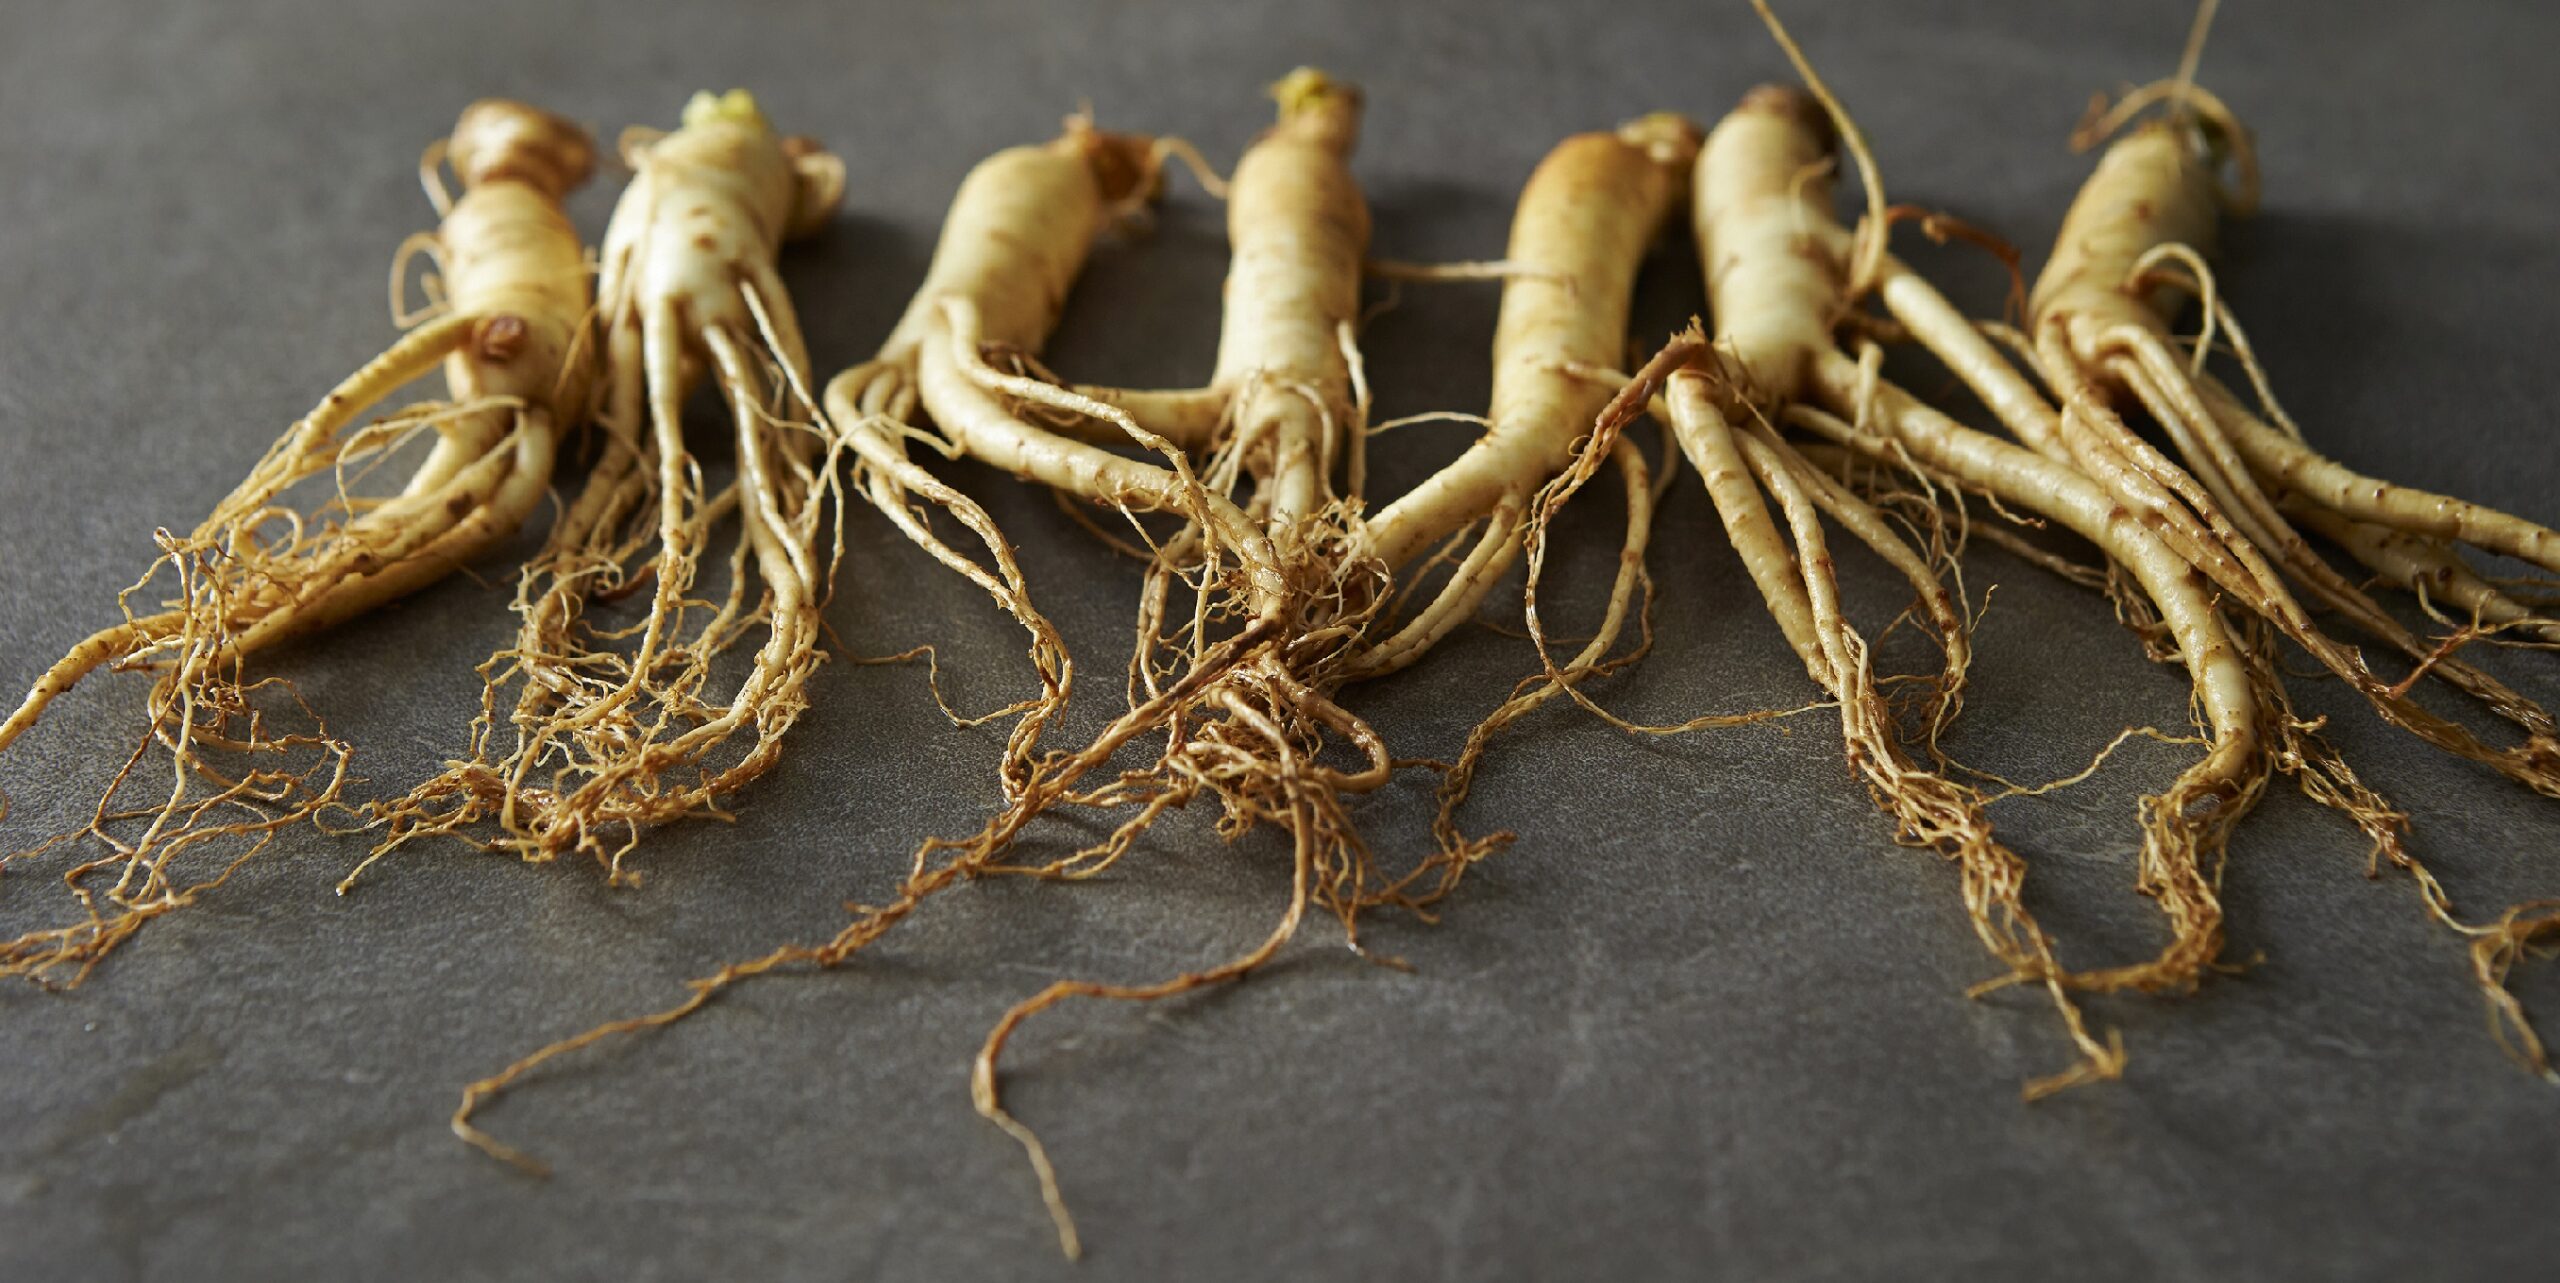 Ginseng reduces muscle damage and improves recovery after exercise